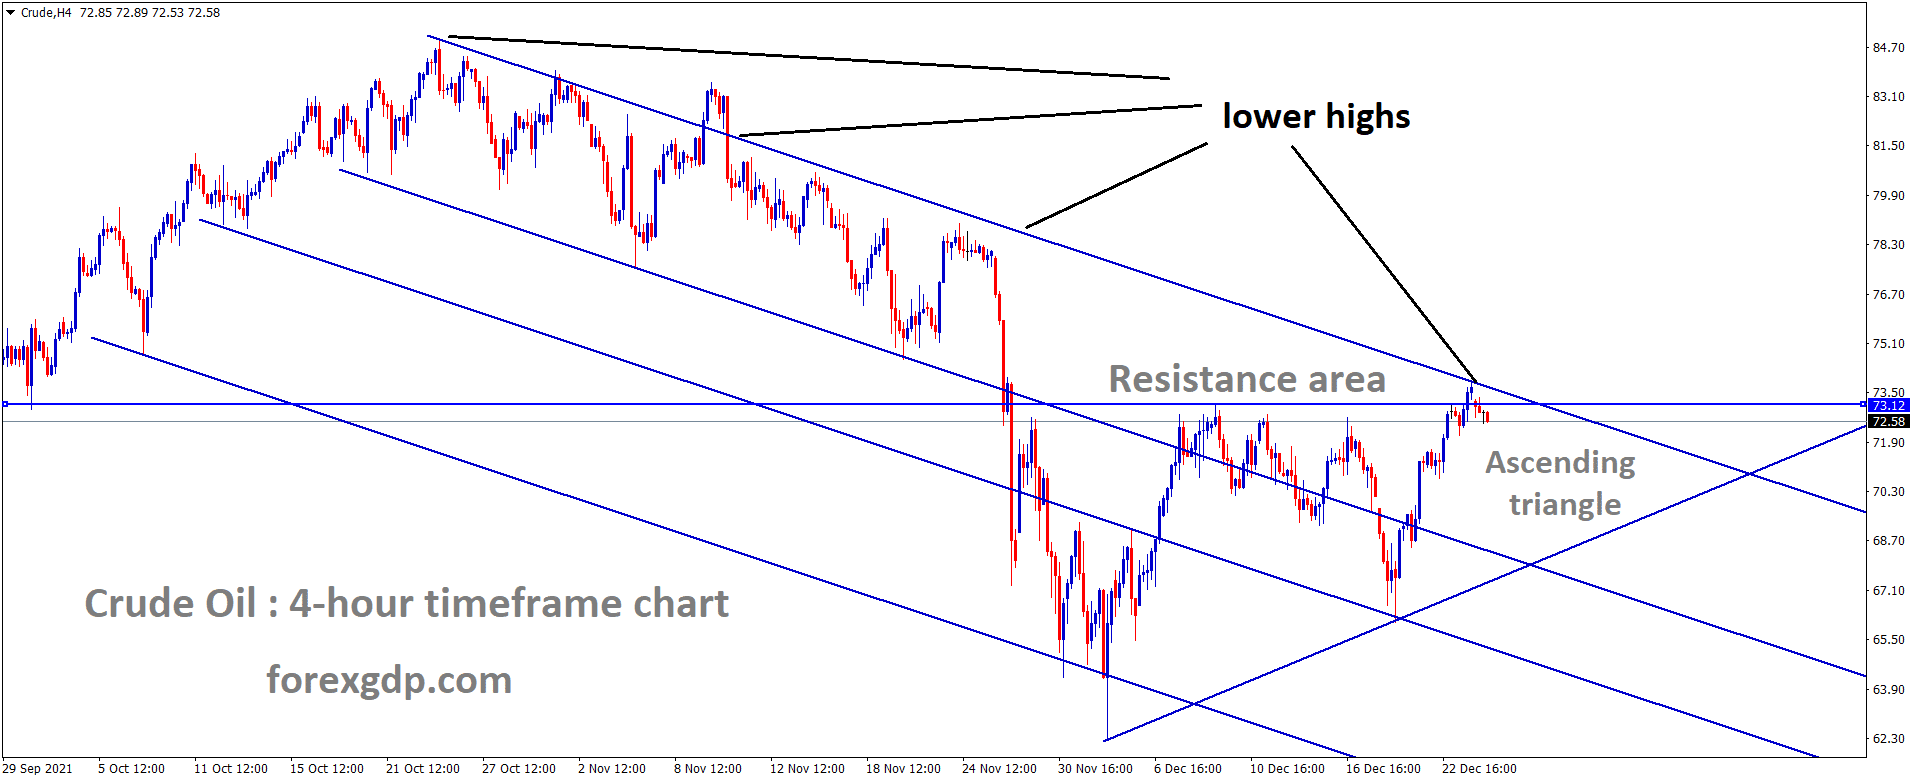 Crudeoil has reached the lower high area of the Descending channel and resistance area of the Ascending triangle pattern